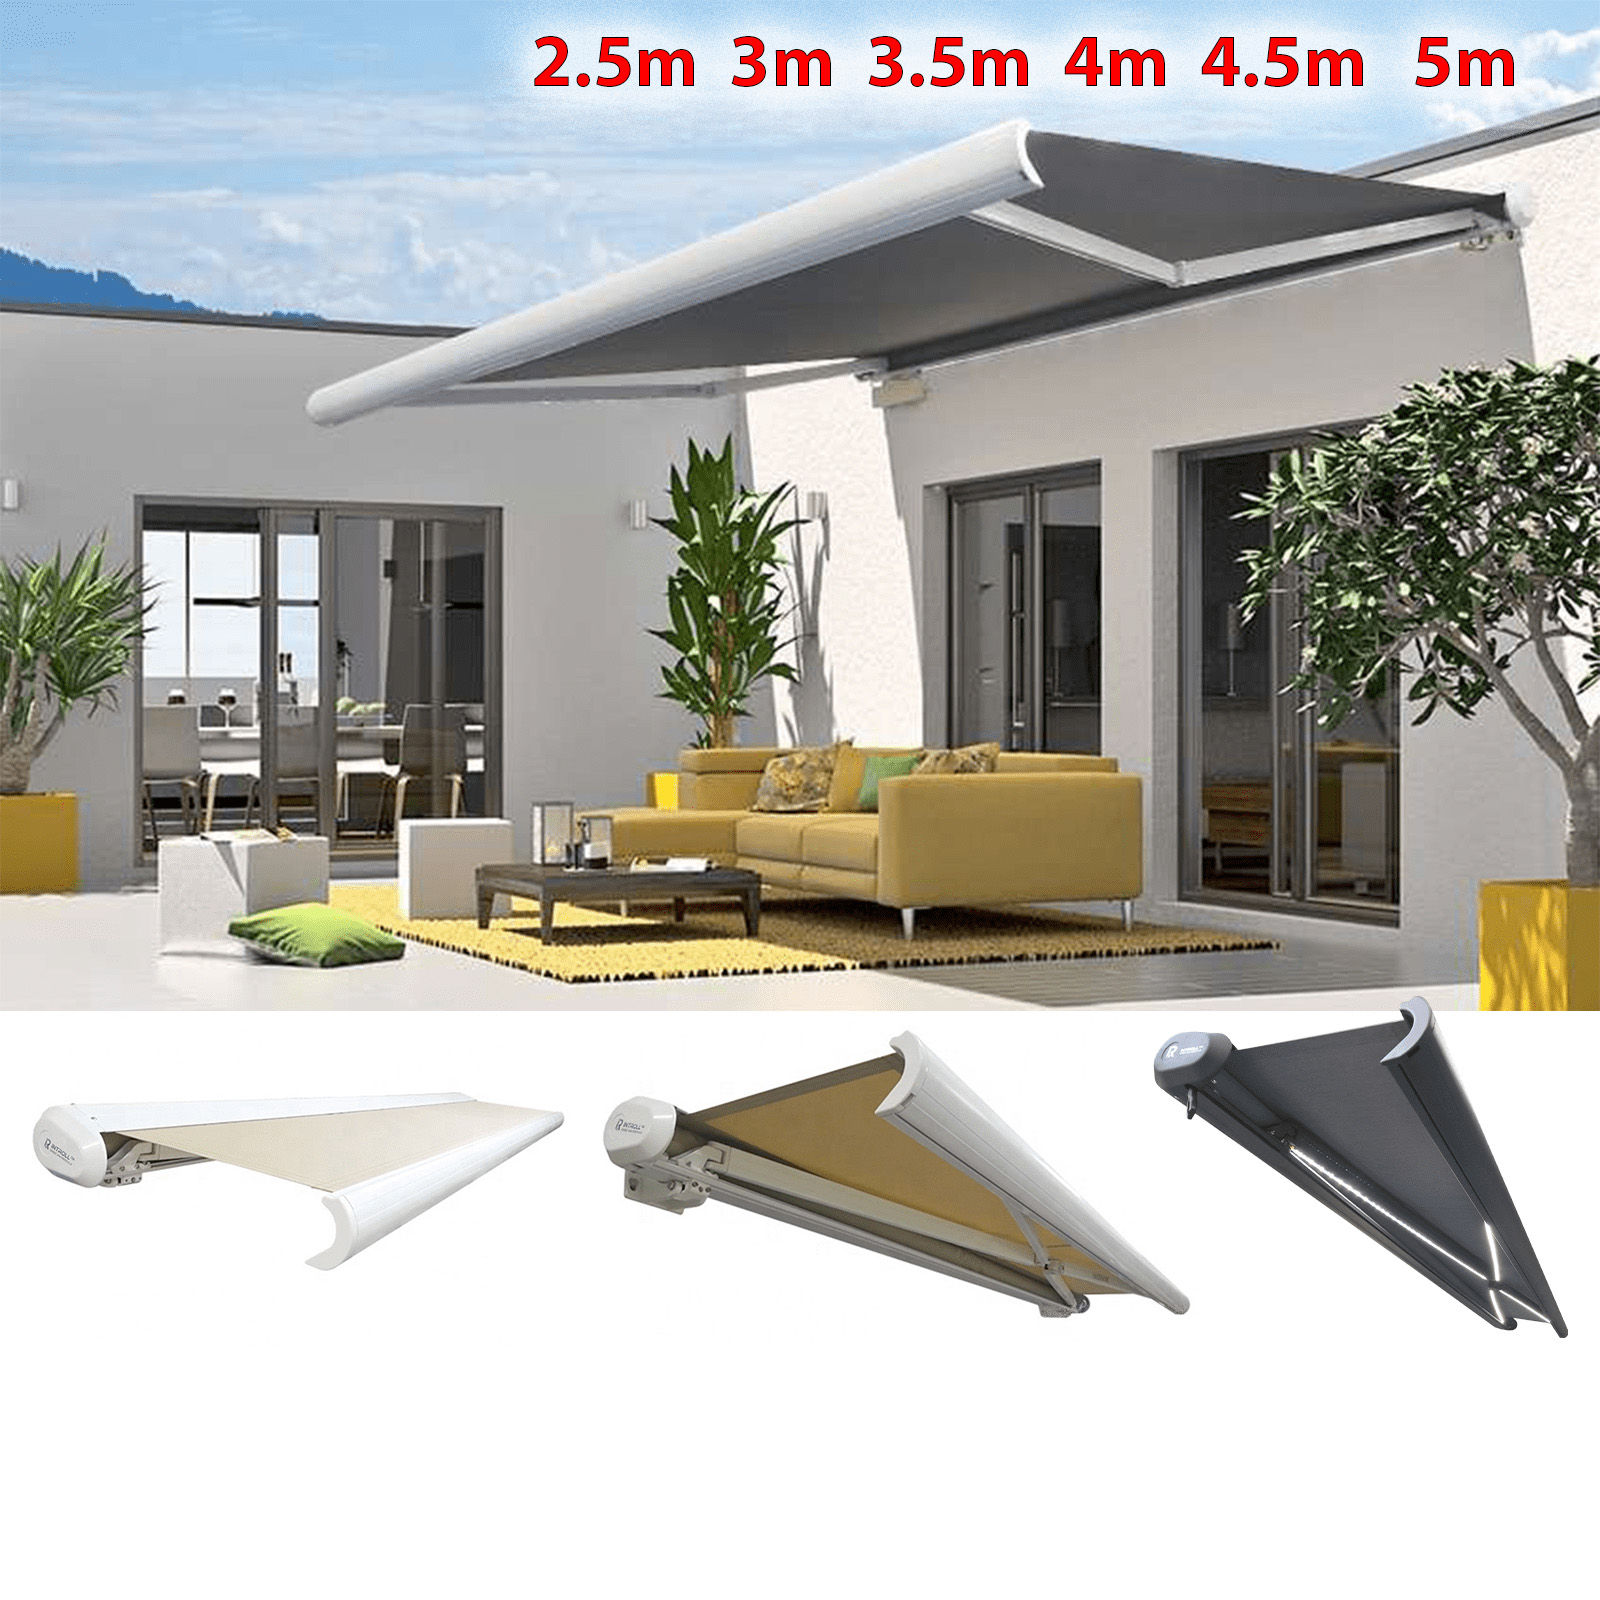 INT500 Retractable Awnings Garden Patio Canopy Full Cassette White Frame Grey Frame Fabrci 